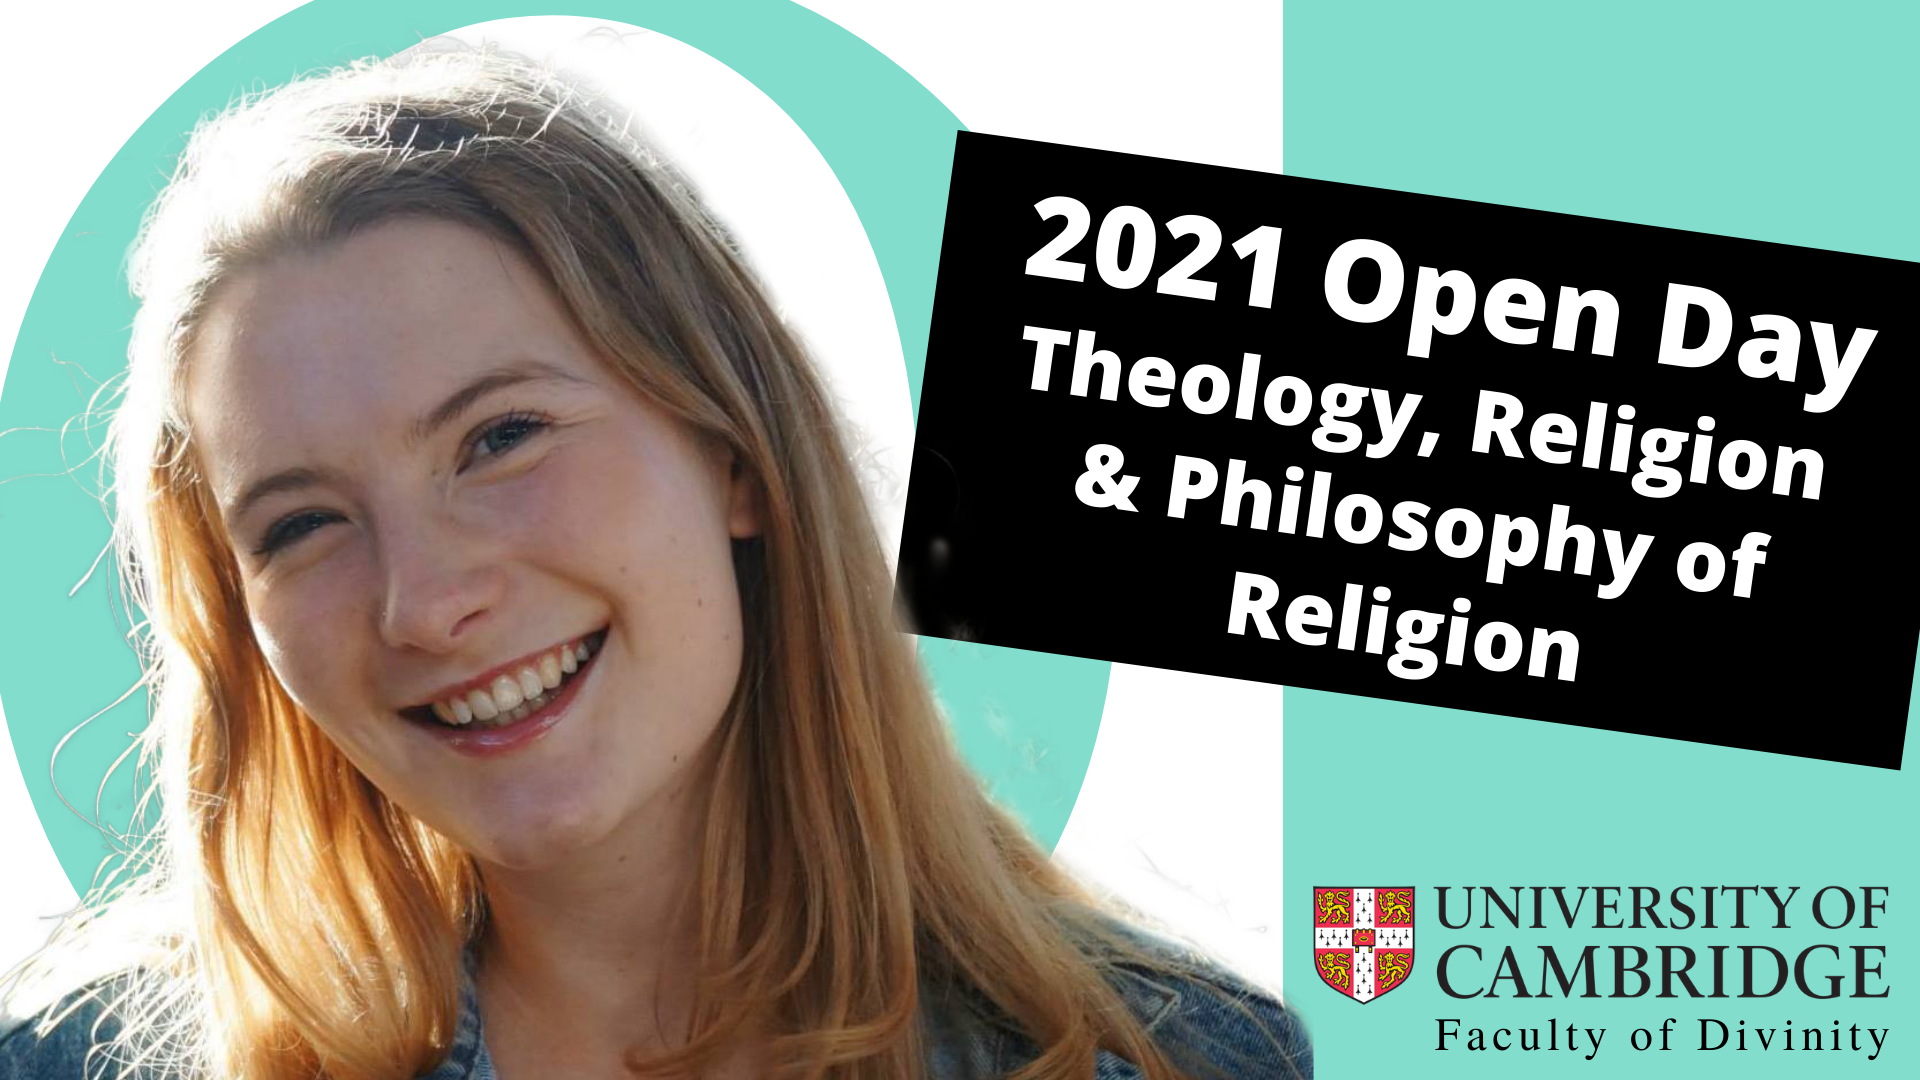 2021 Open Day